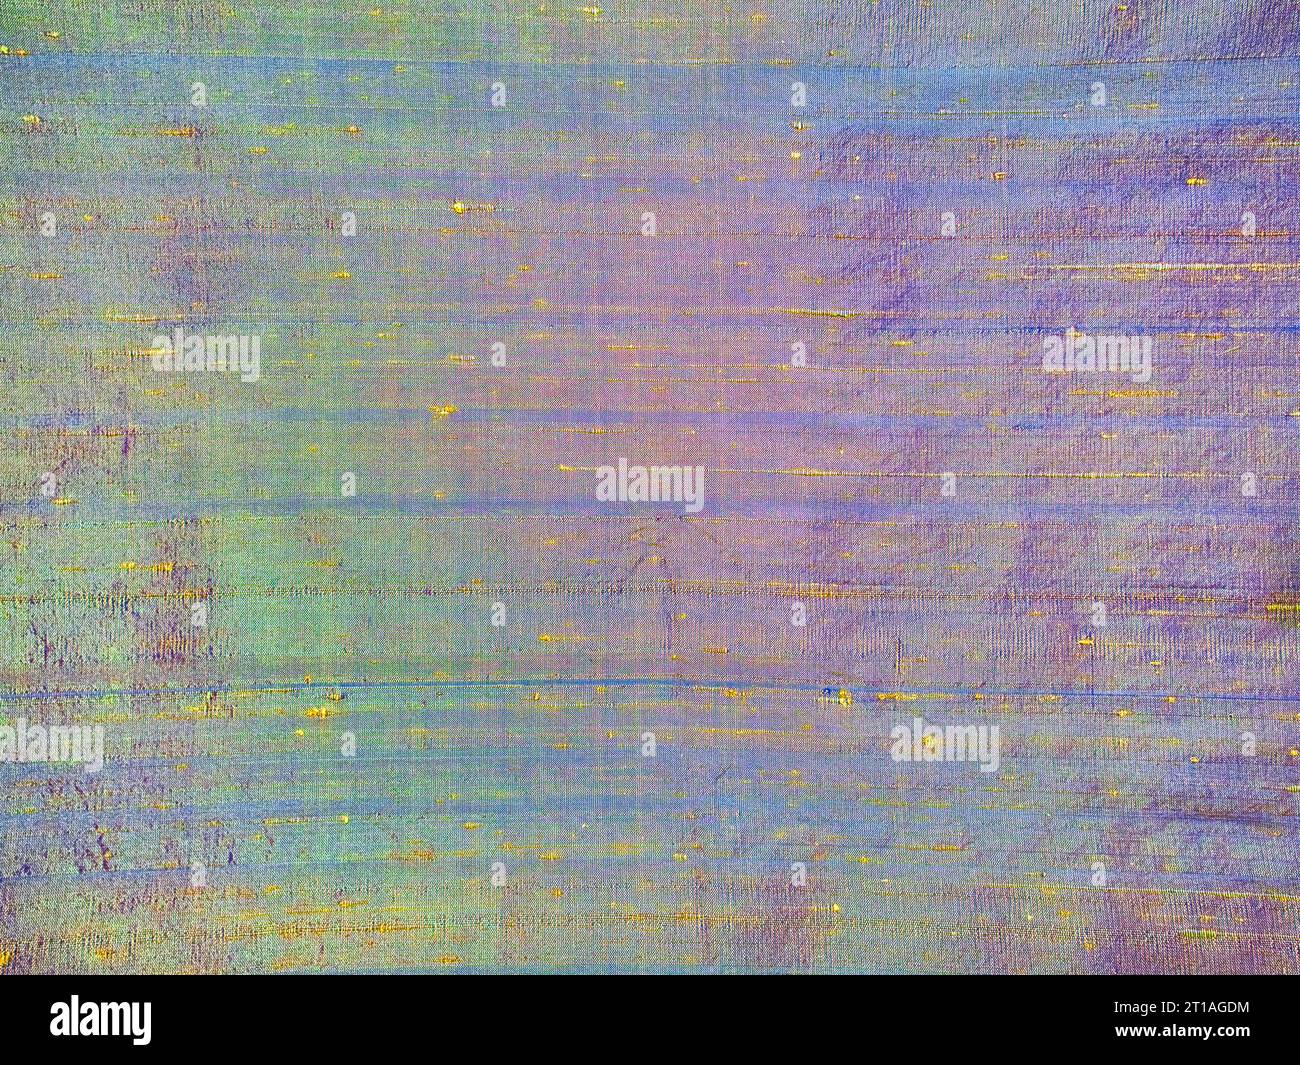 Close up detail of multicolor iridescent gold and purple slubby dupioni silk fabric for background or image detail. Stock Photo